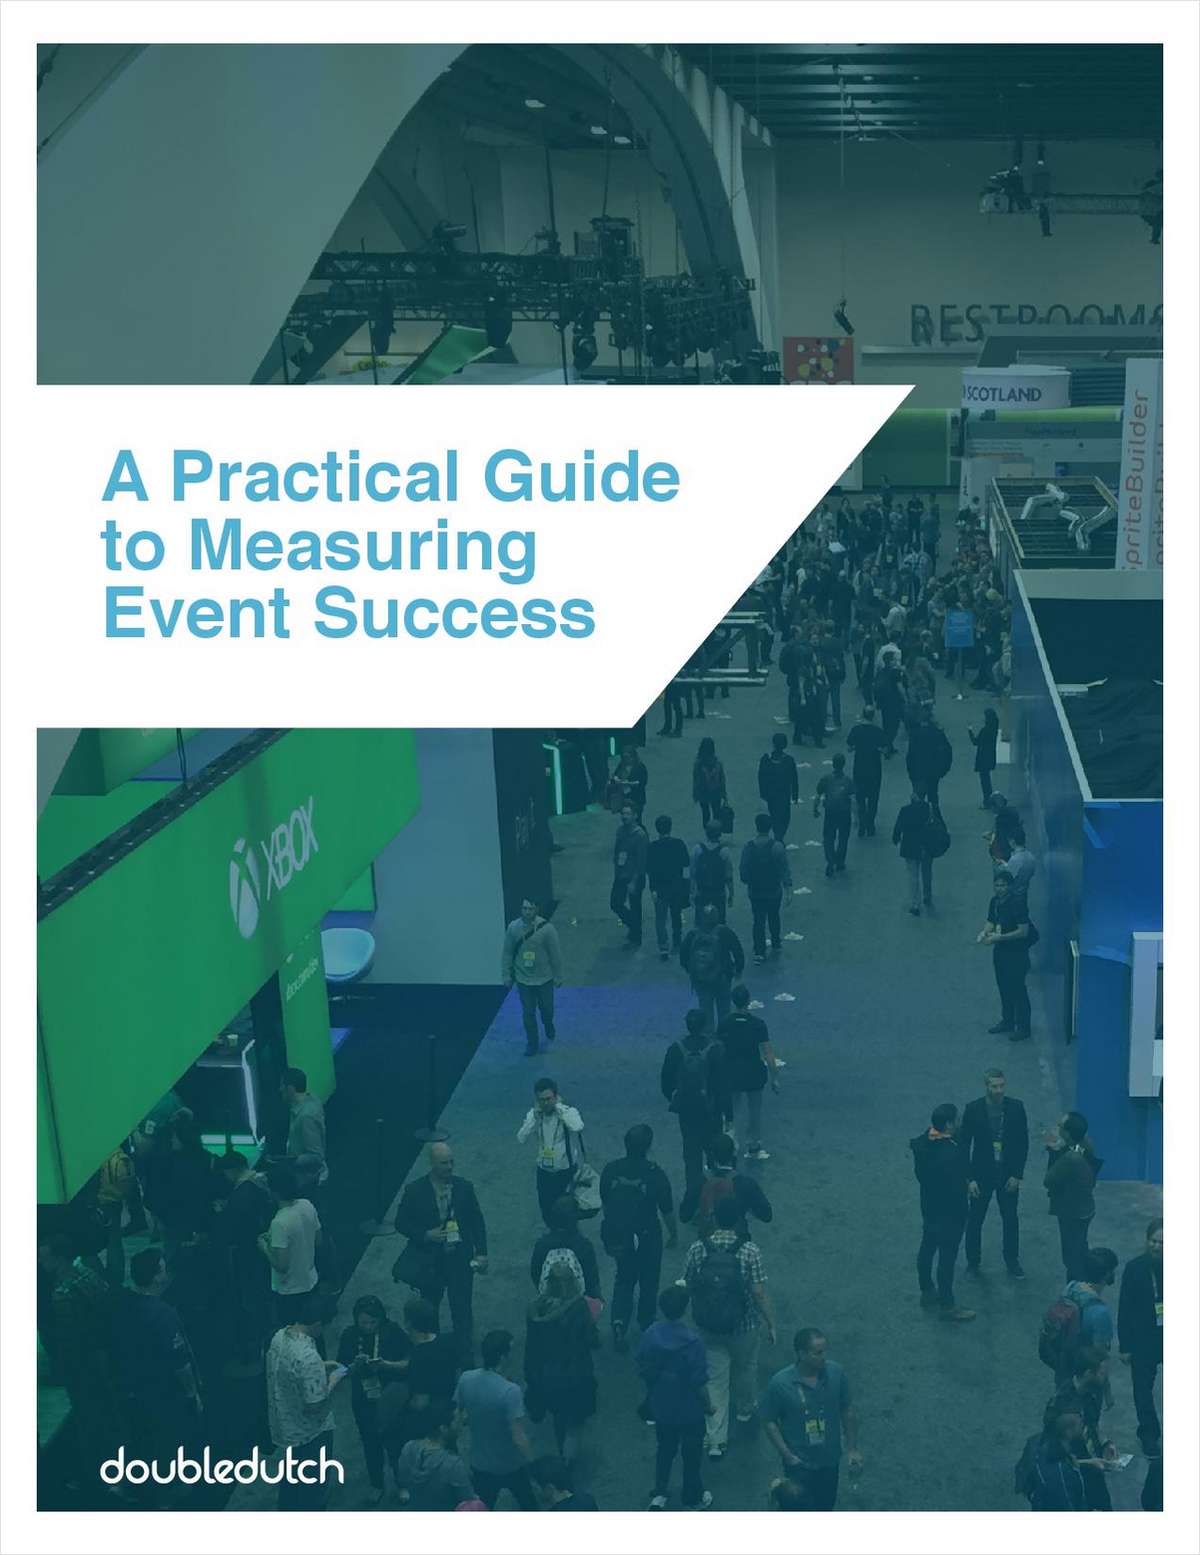 A Practical Guide to Measuring Event Success